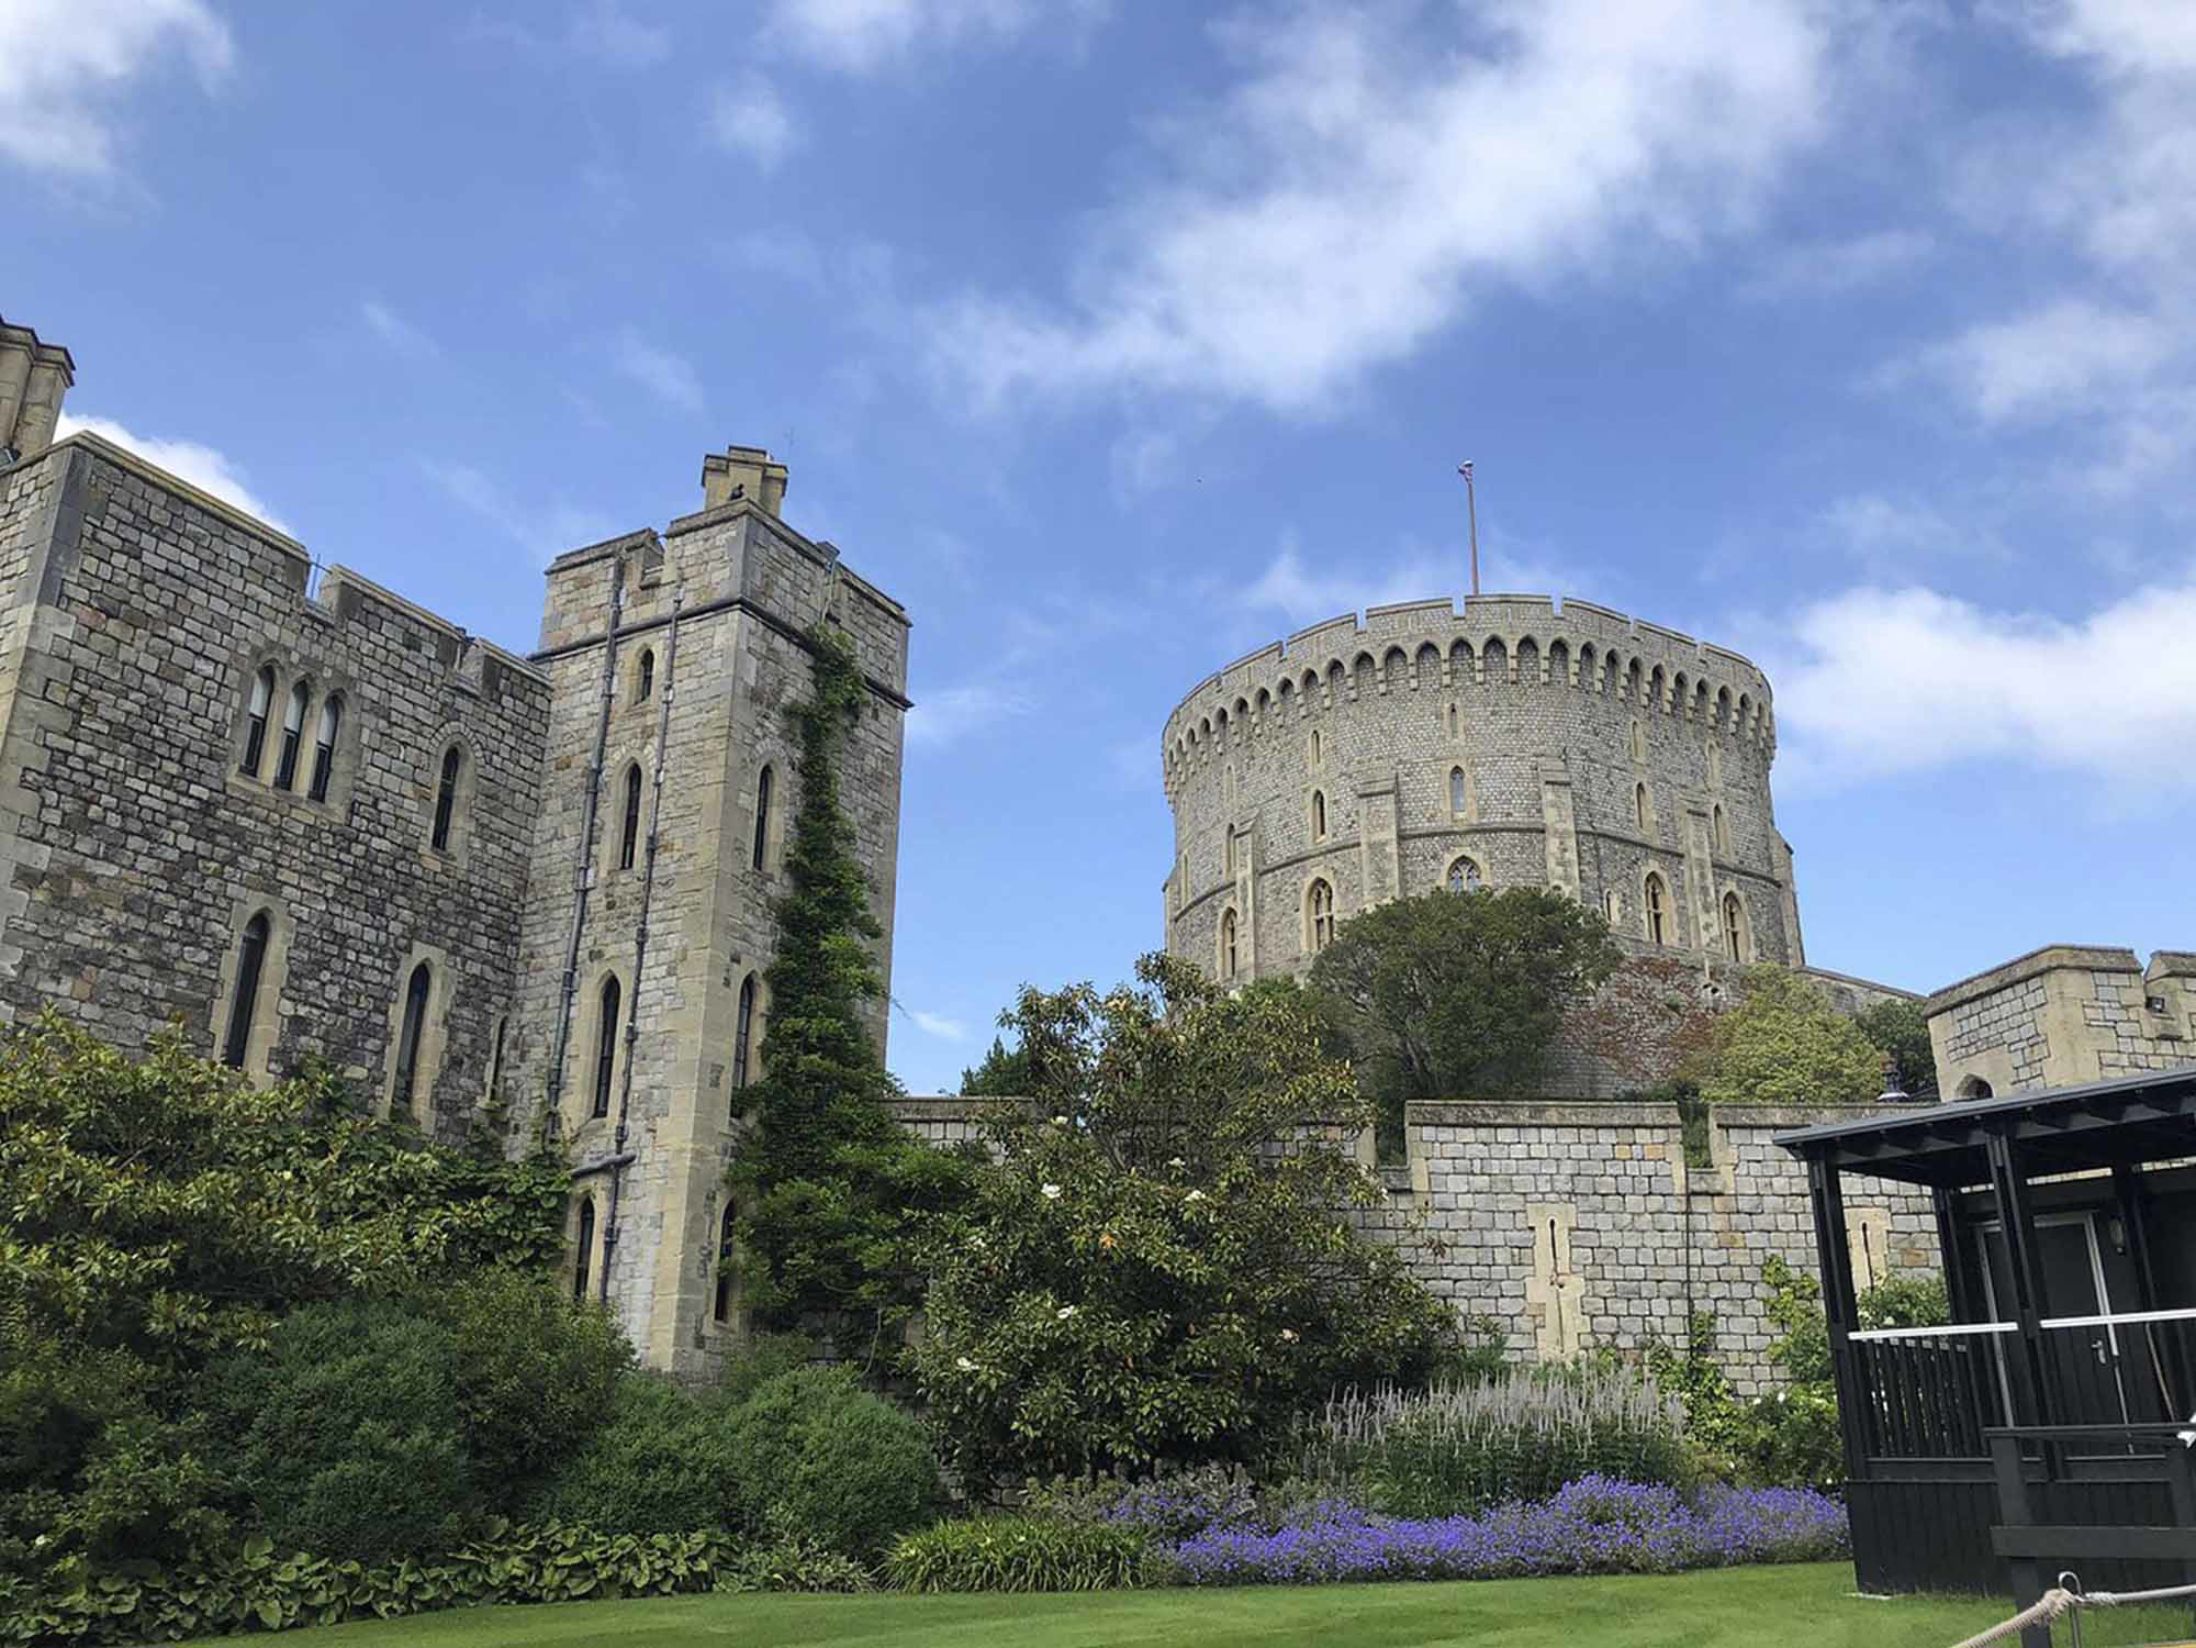 Things to do in Windsor - Windsor Castle